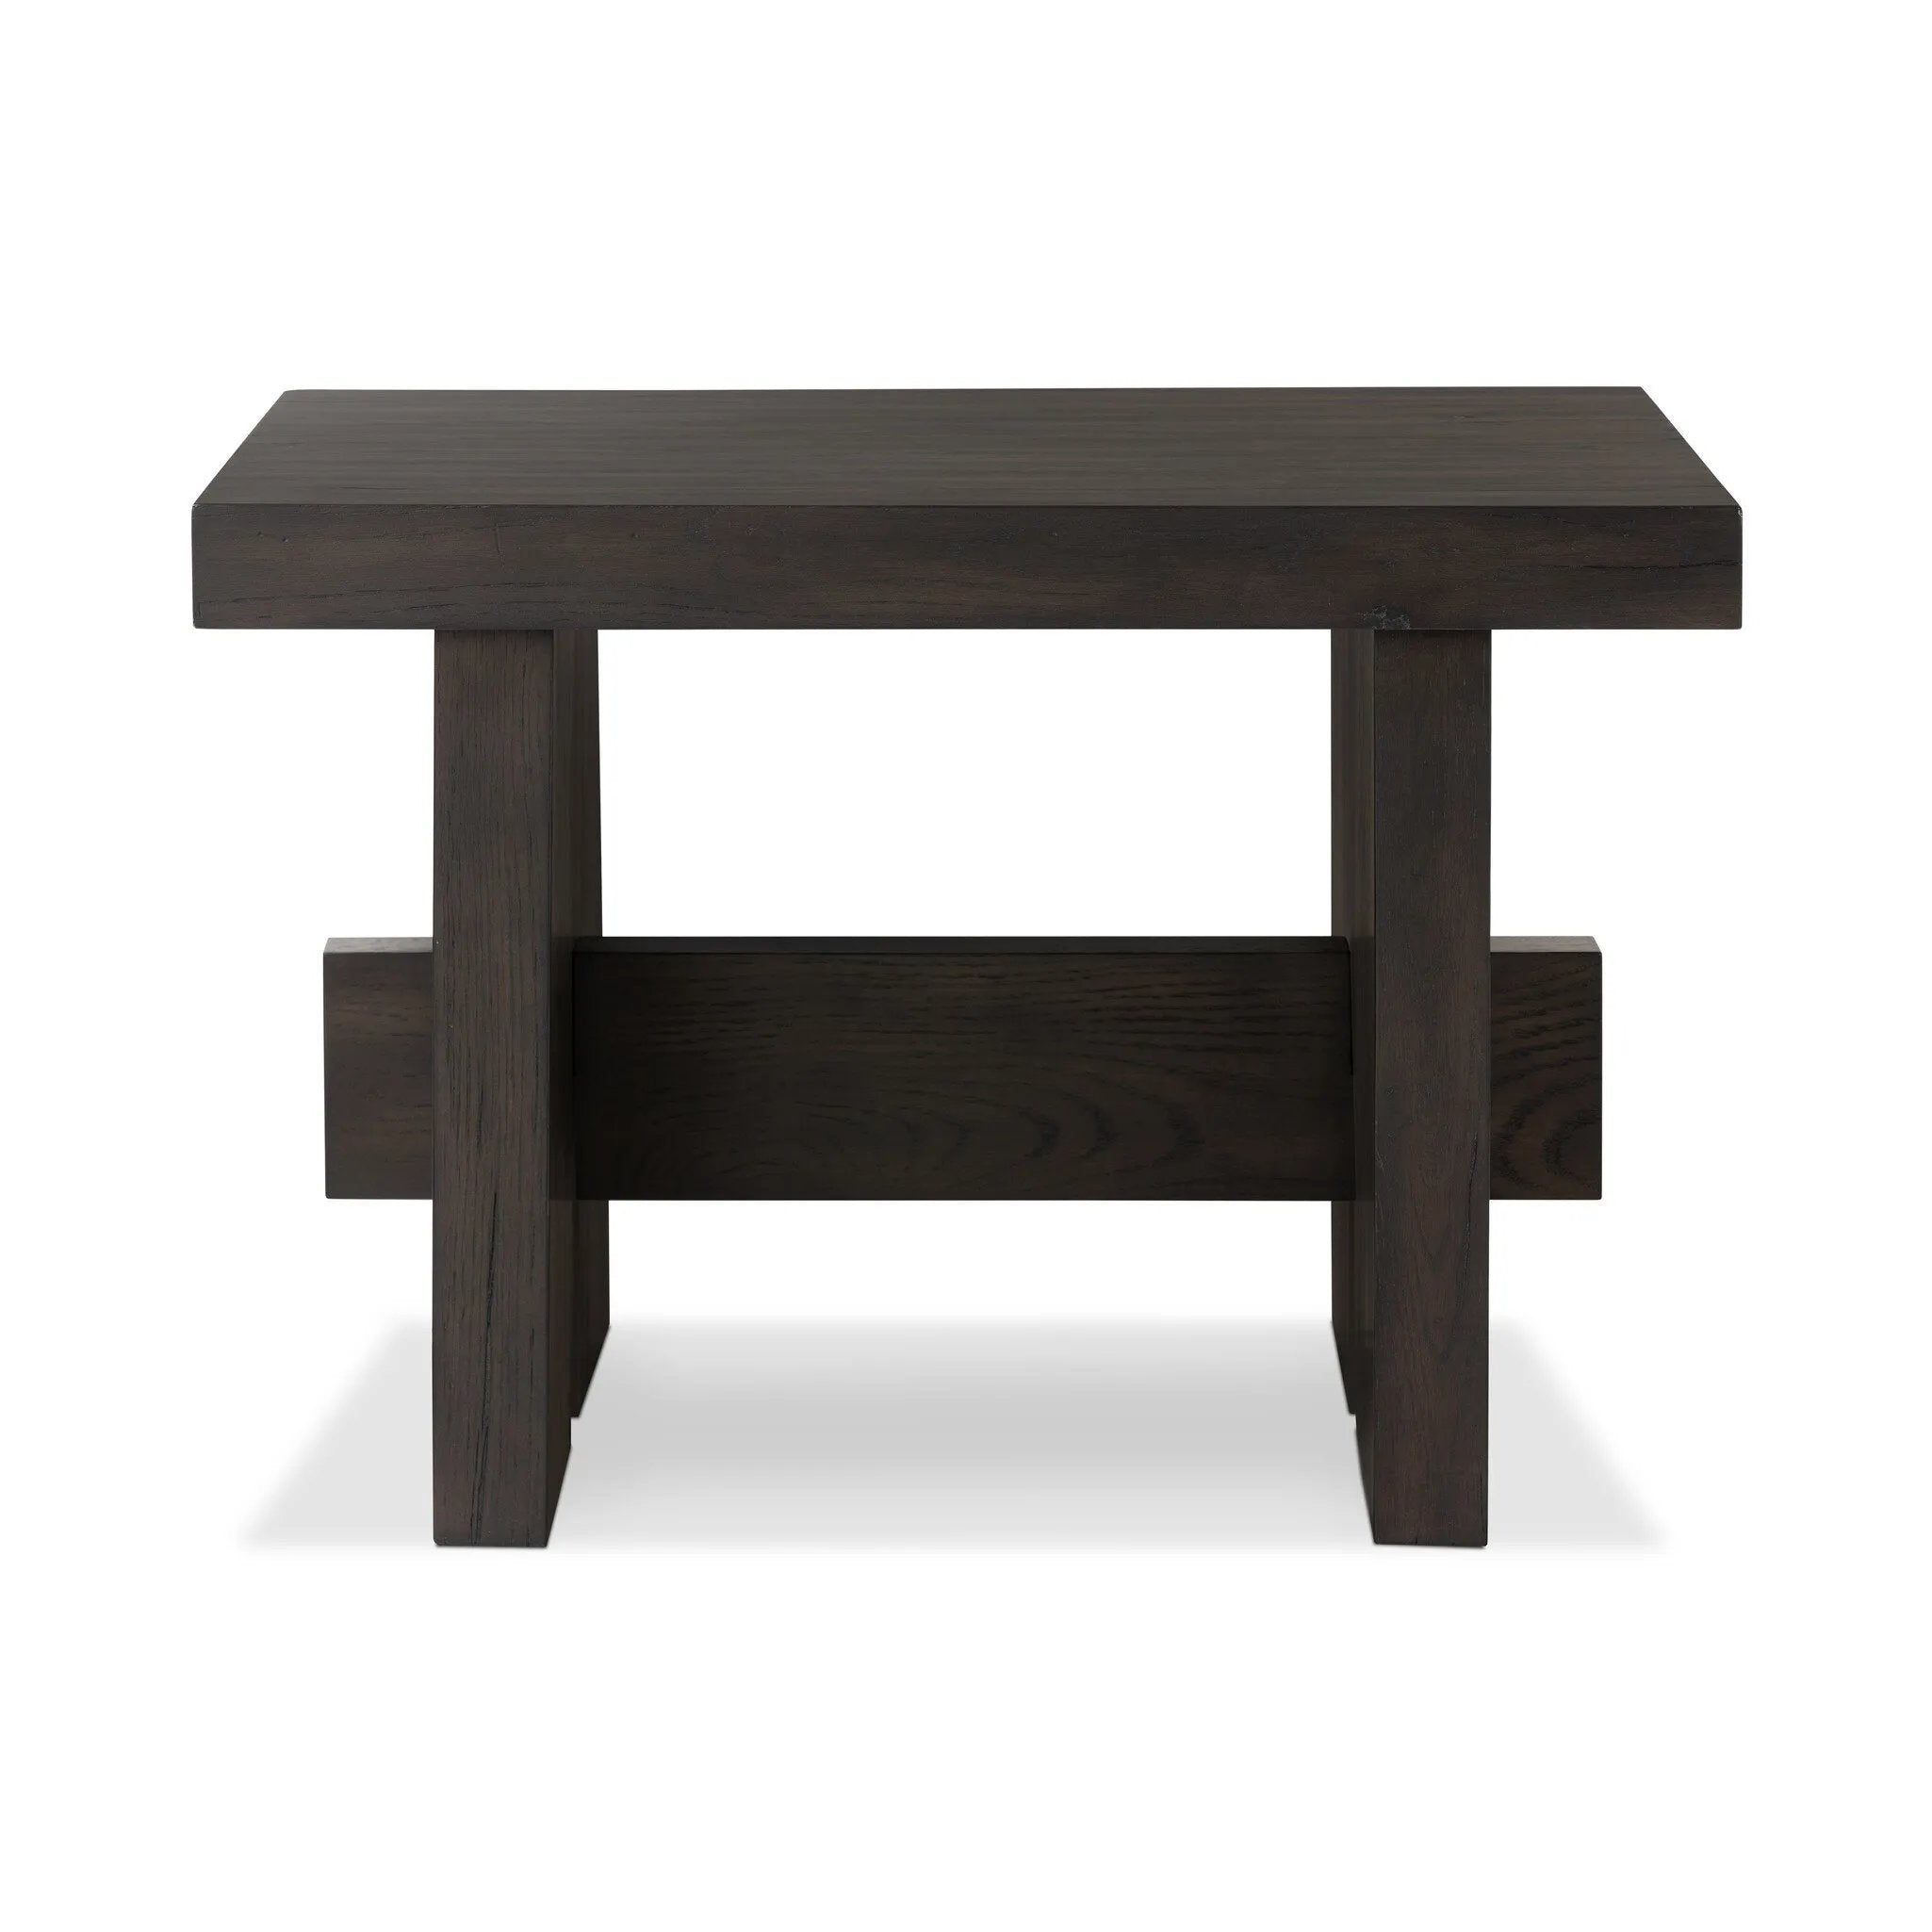 A versatile end table of smoked black oak features joint and connection construction for a design-forward look. Visible knots and graining add character.Collection: Haide Amethyst Home provides interior design, new home construction design consulting, vintage area rugs, and lighting in the Miami metro area.